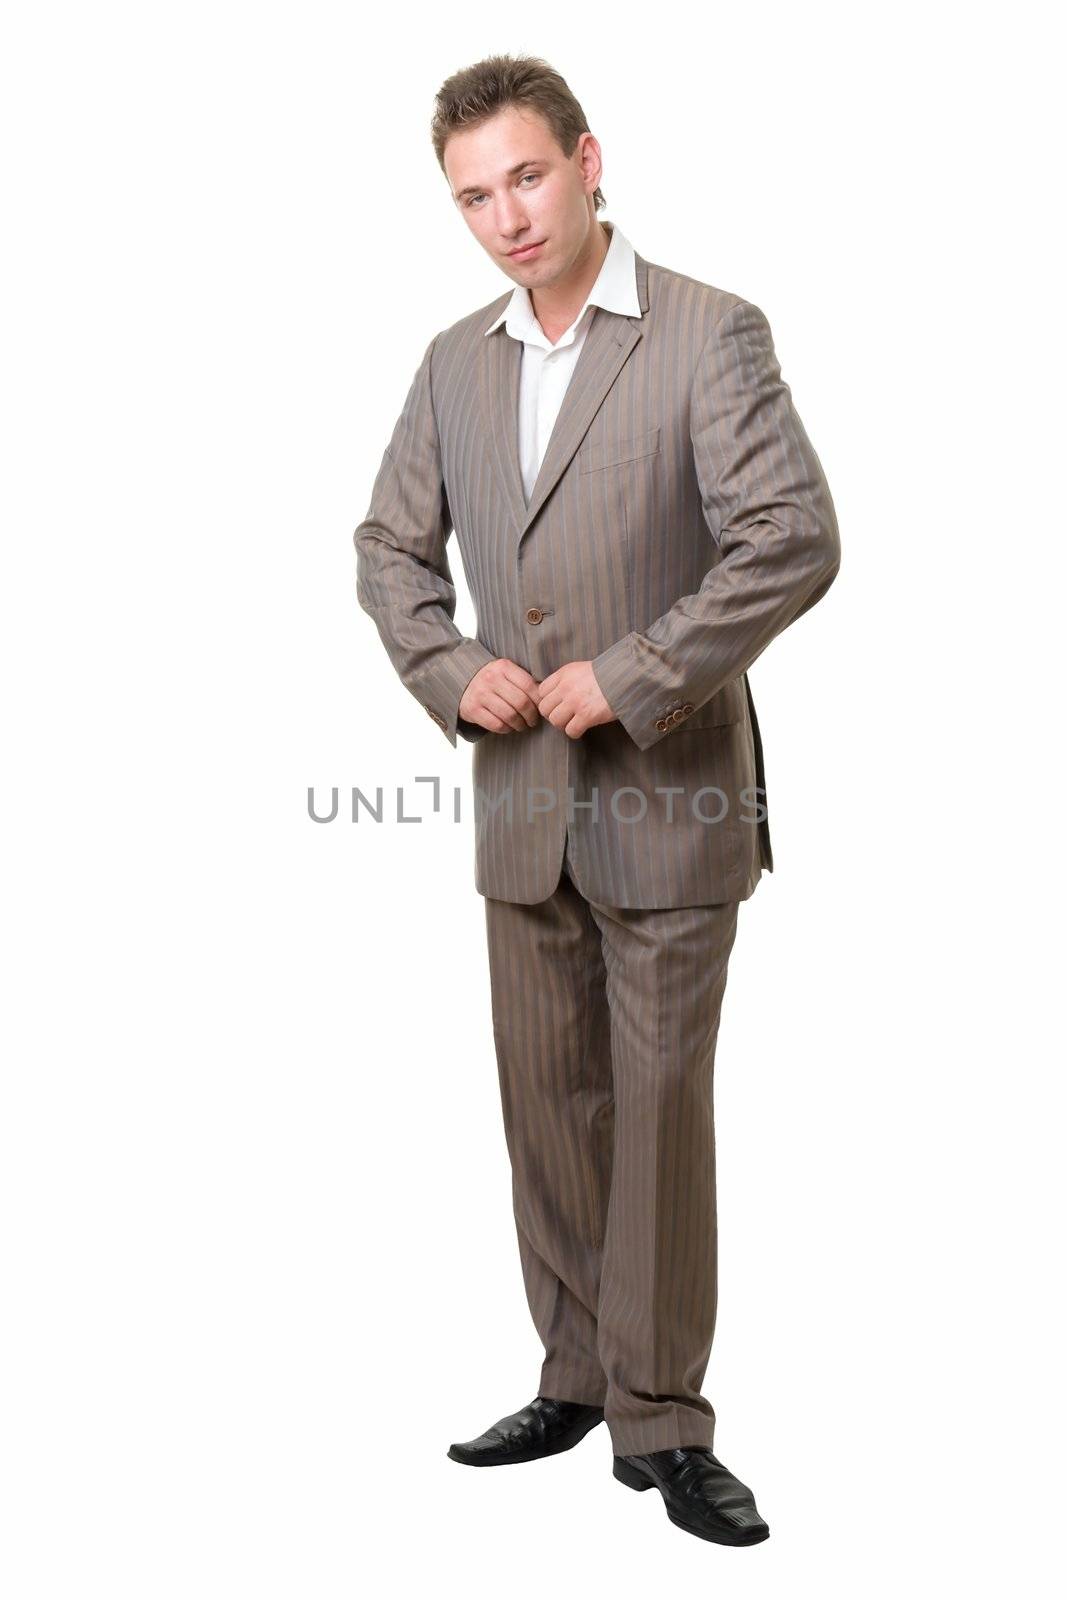 young man clasps button oneself up on a white background